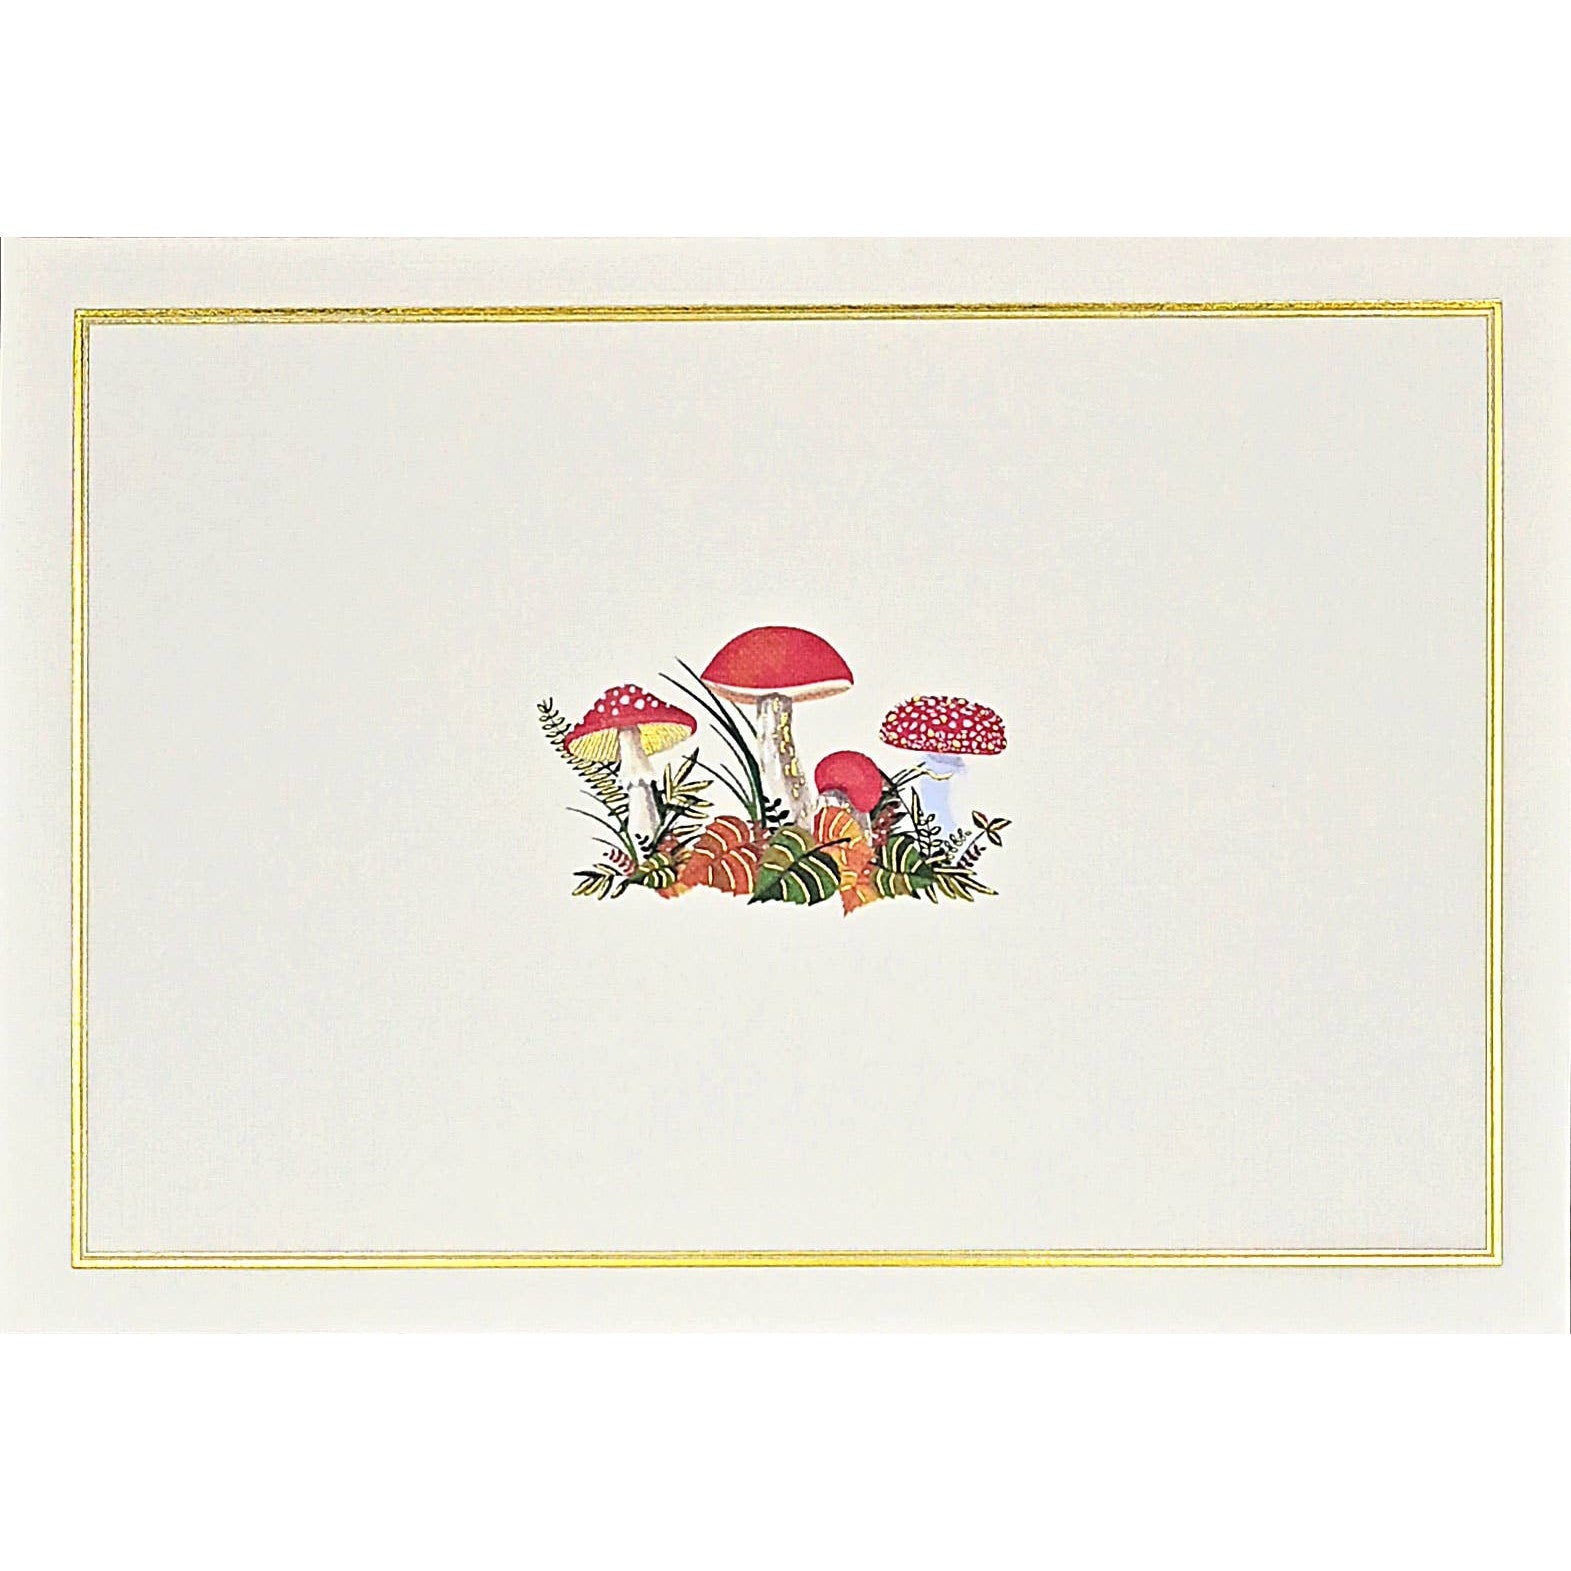 Mushrooms Note Cards | 14 Cards with Embellished Toadstools